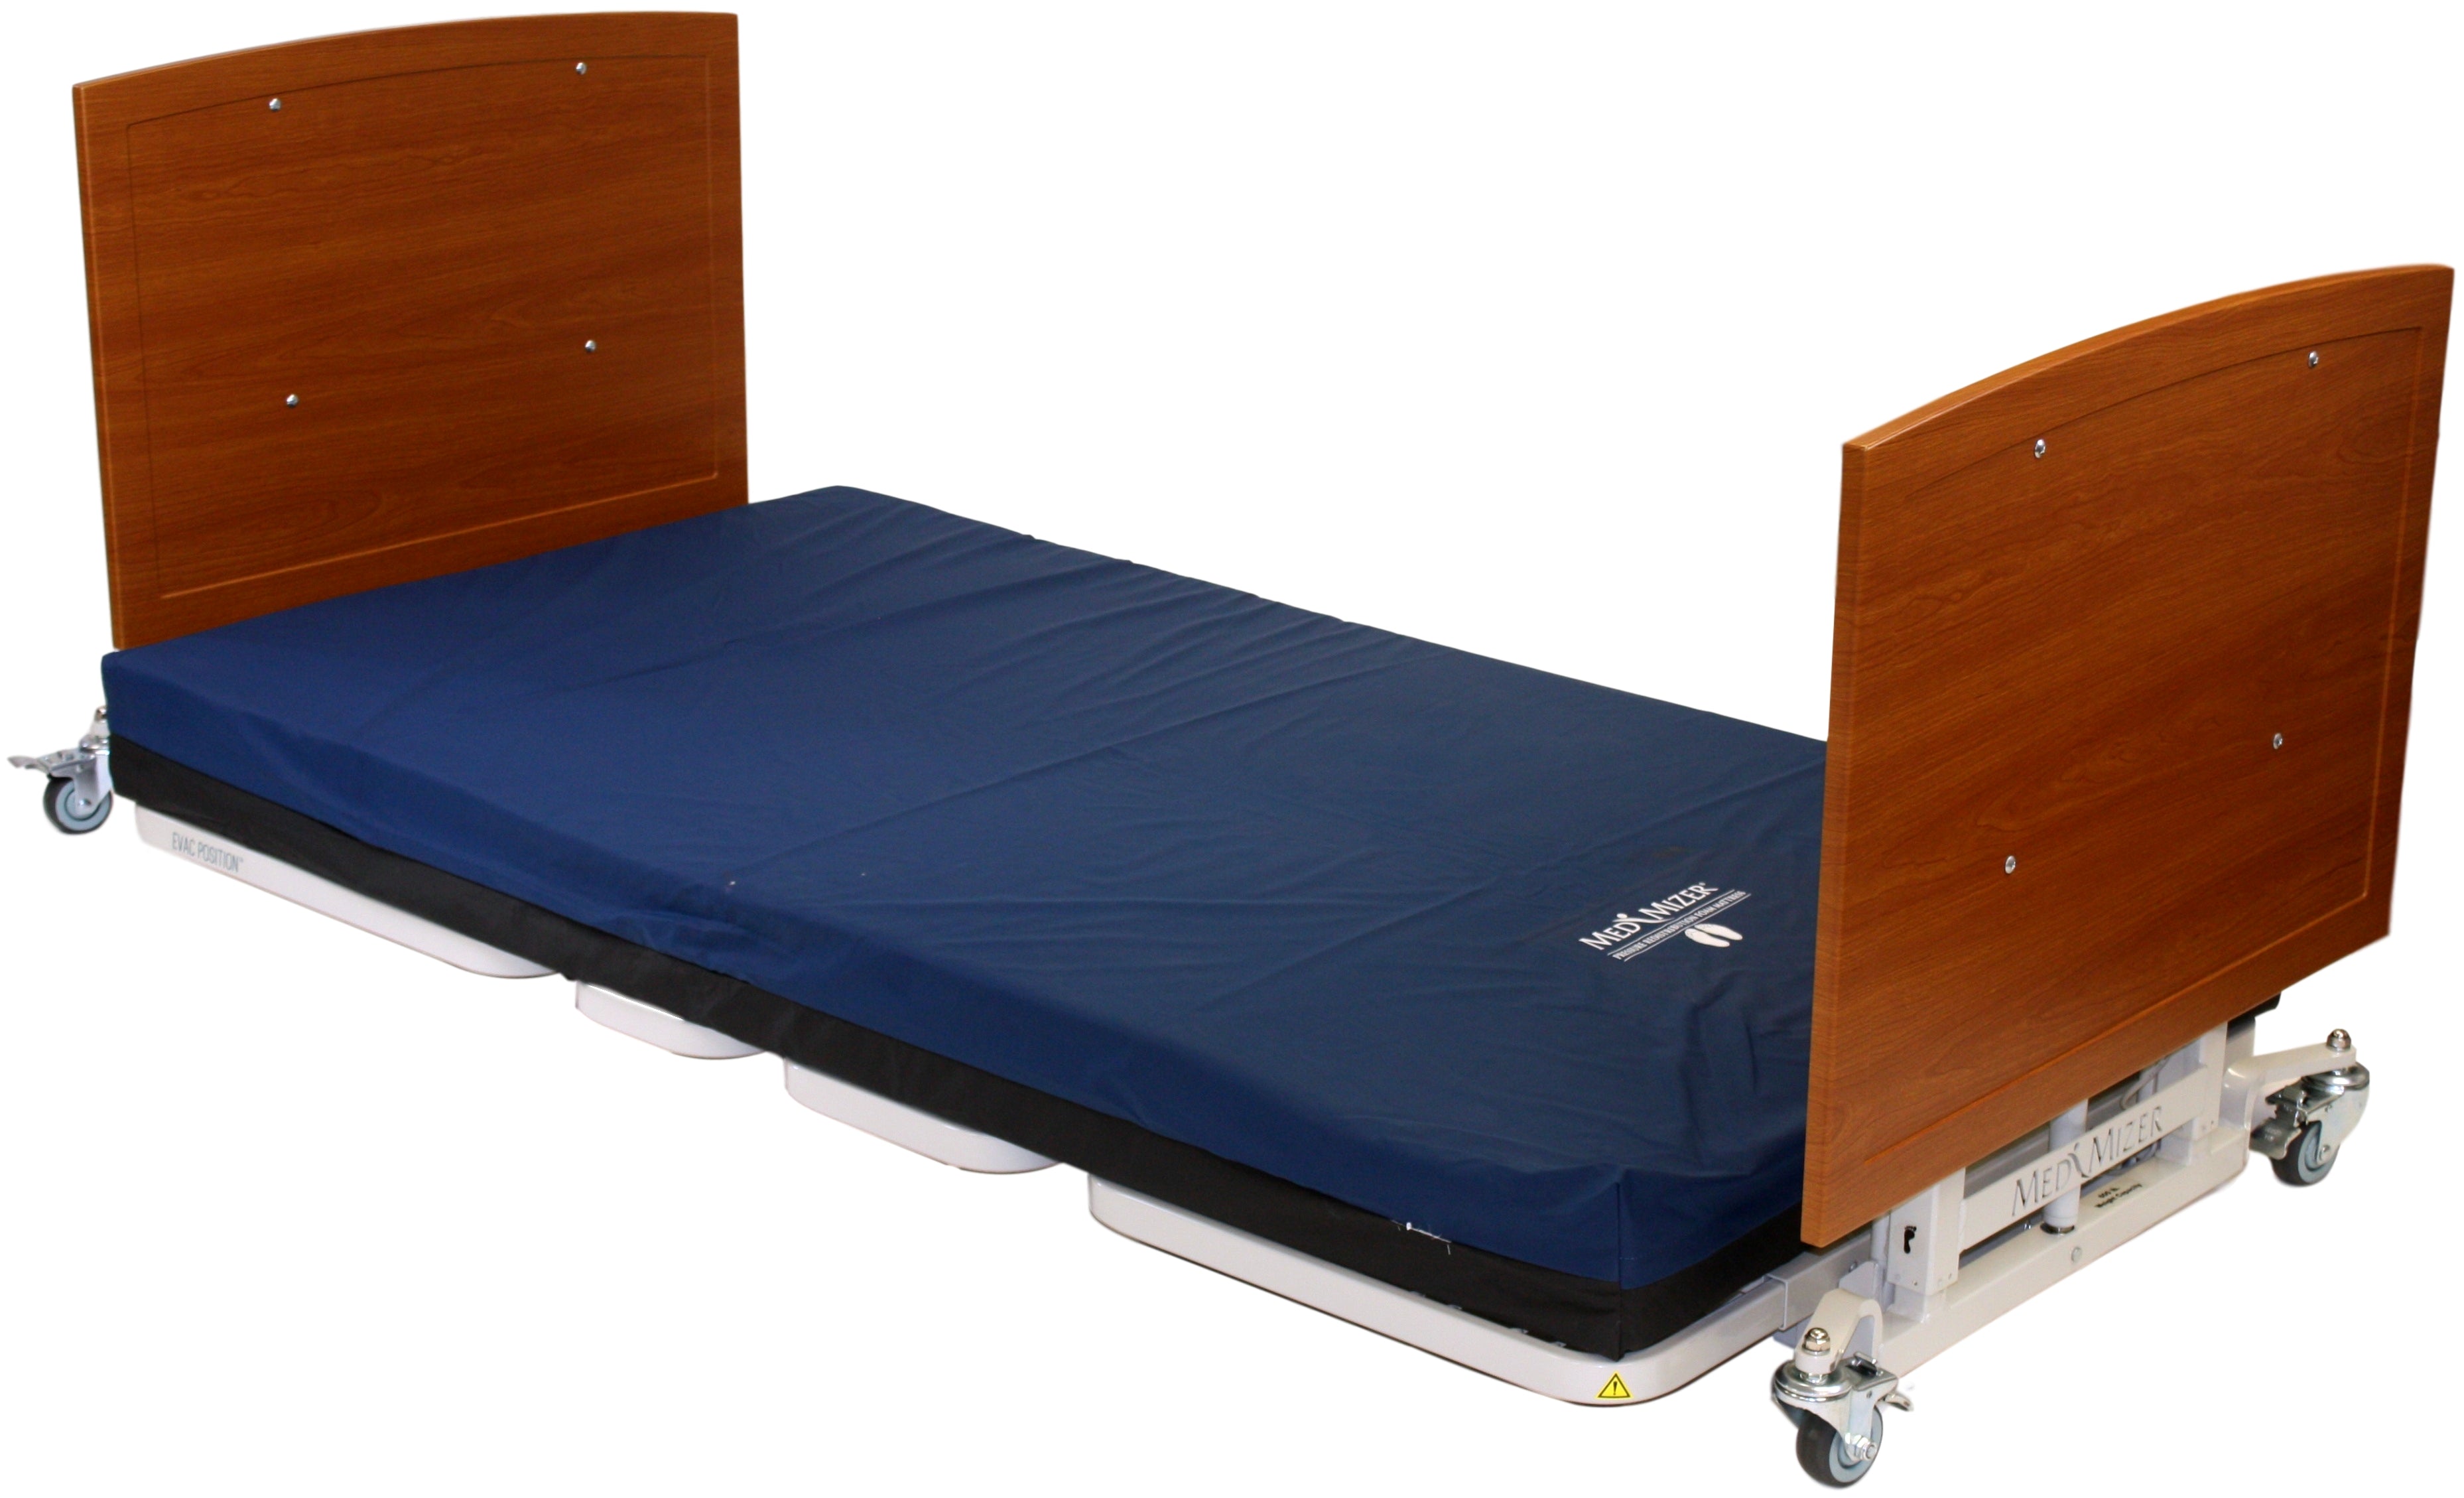 Med-Mizer AllCare Low Hospital Bed and Bariatric Bed  Med-Mizer   